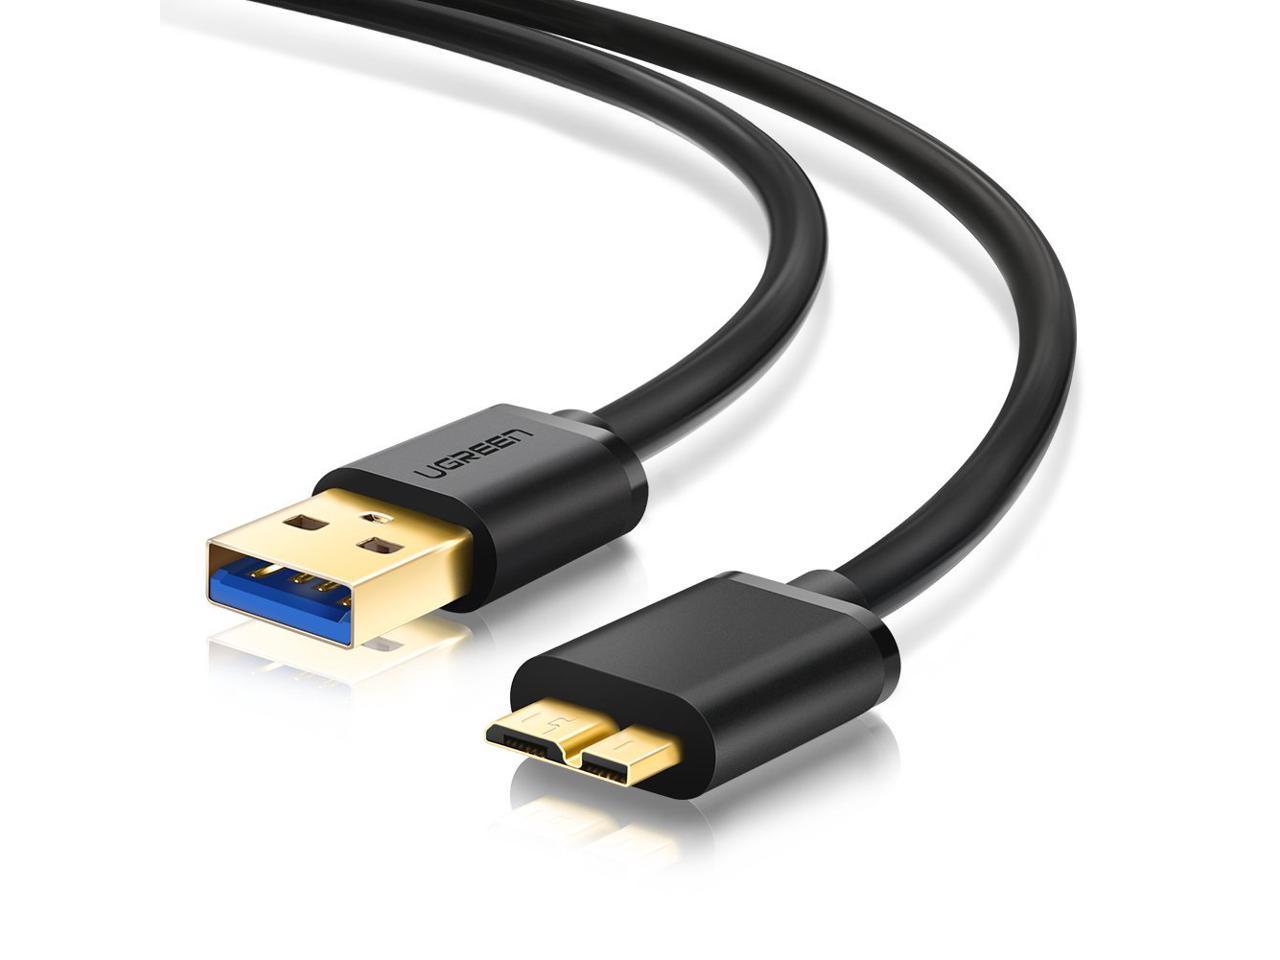 Jansicotek USB 3.0 A Male to Micro B External Hard Drive Cable for My Passport and Elements Portable External Hard Drive, Toshiba, Seagate External Hard Drive, Samsung (3.3ft, 1maters) - Newegg.com